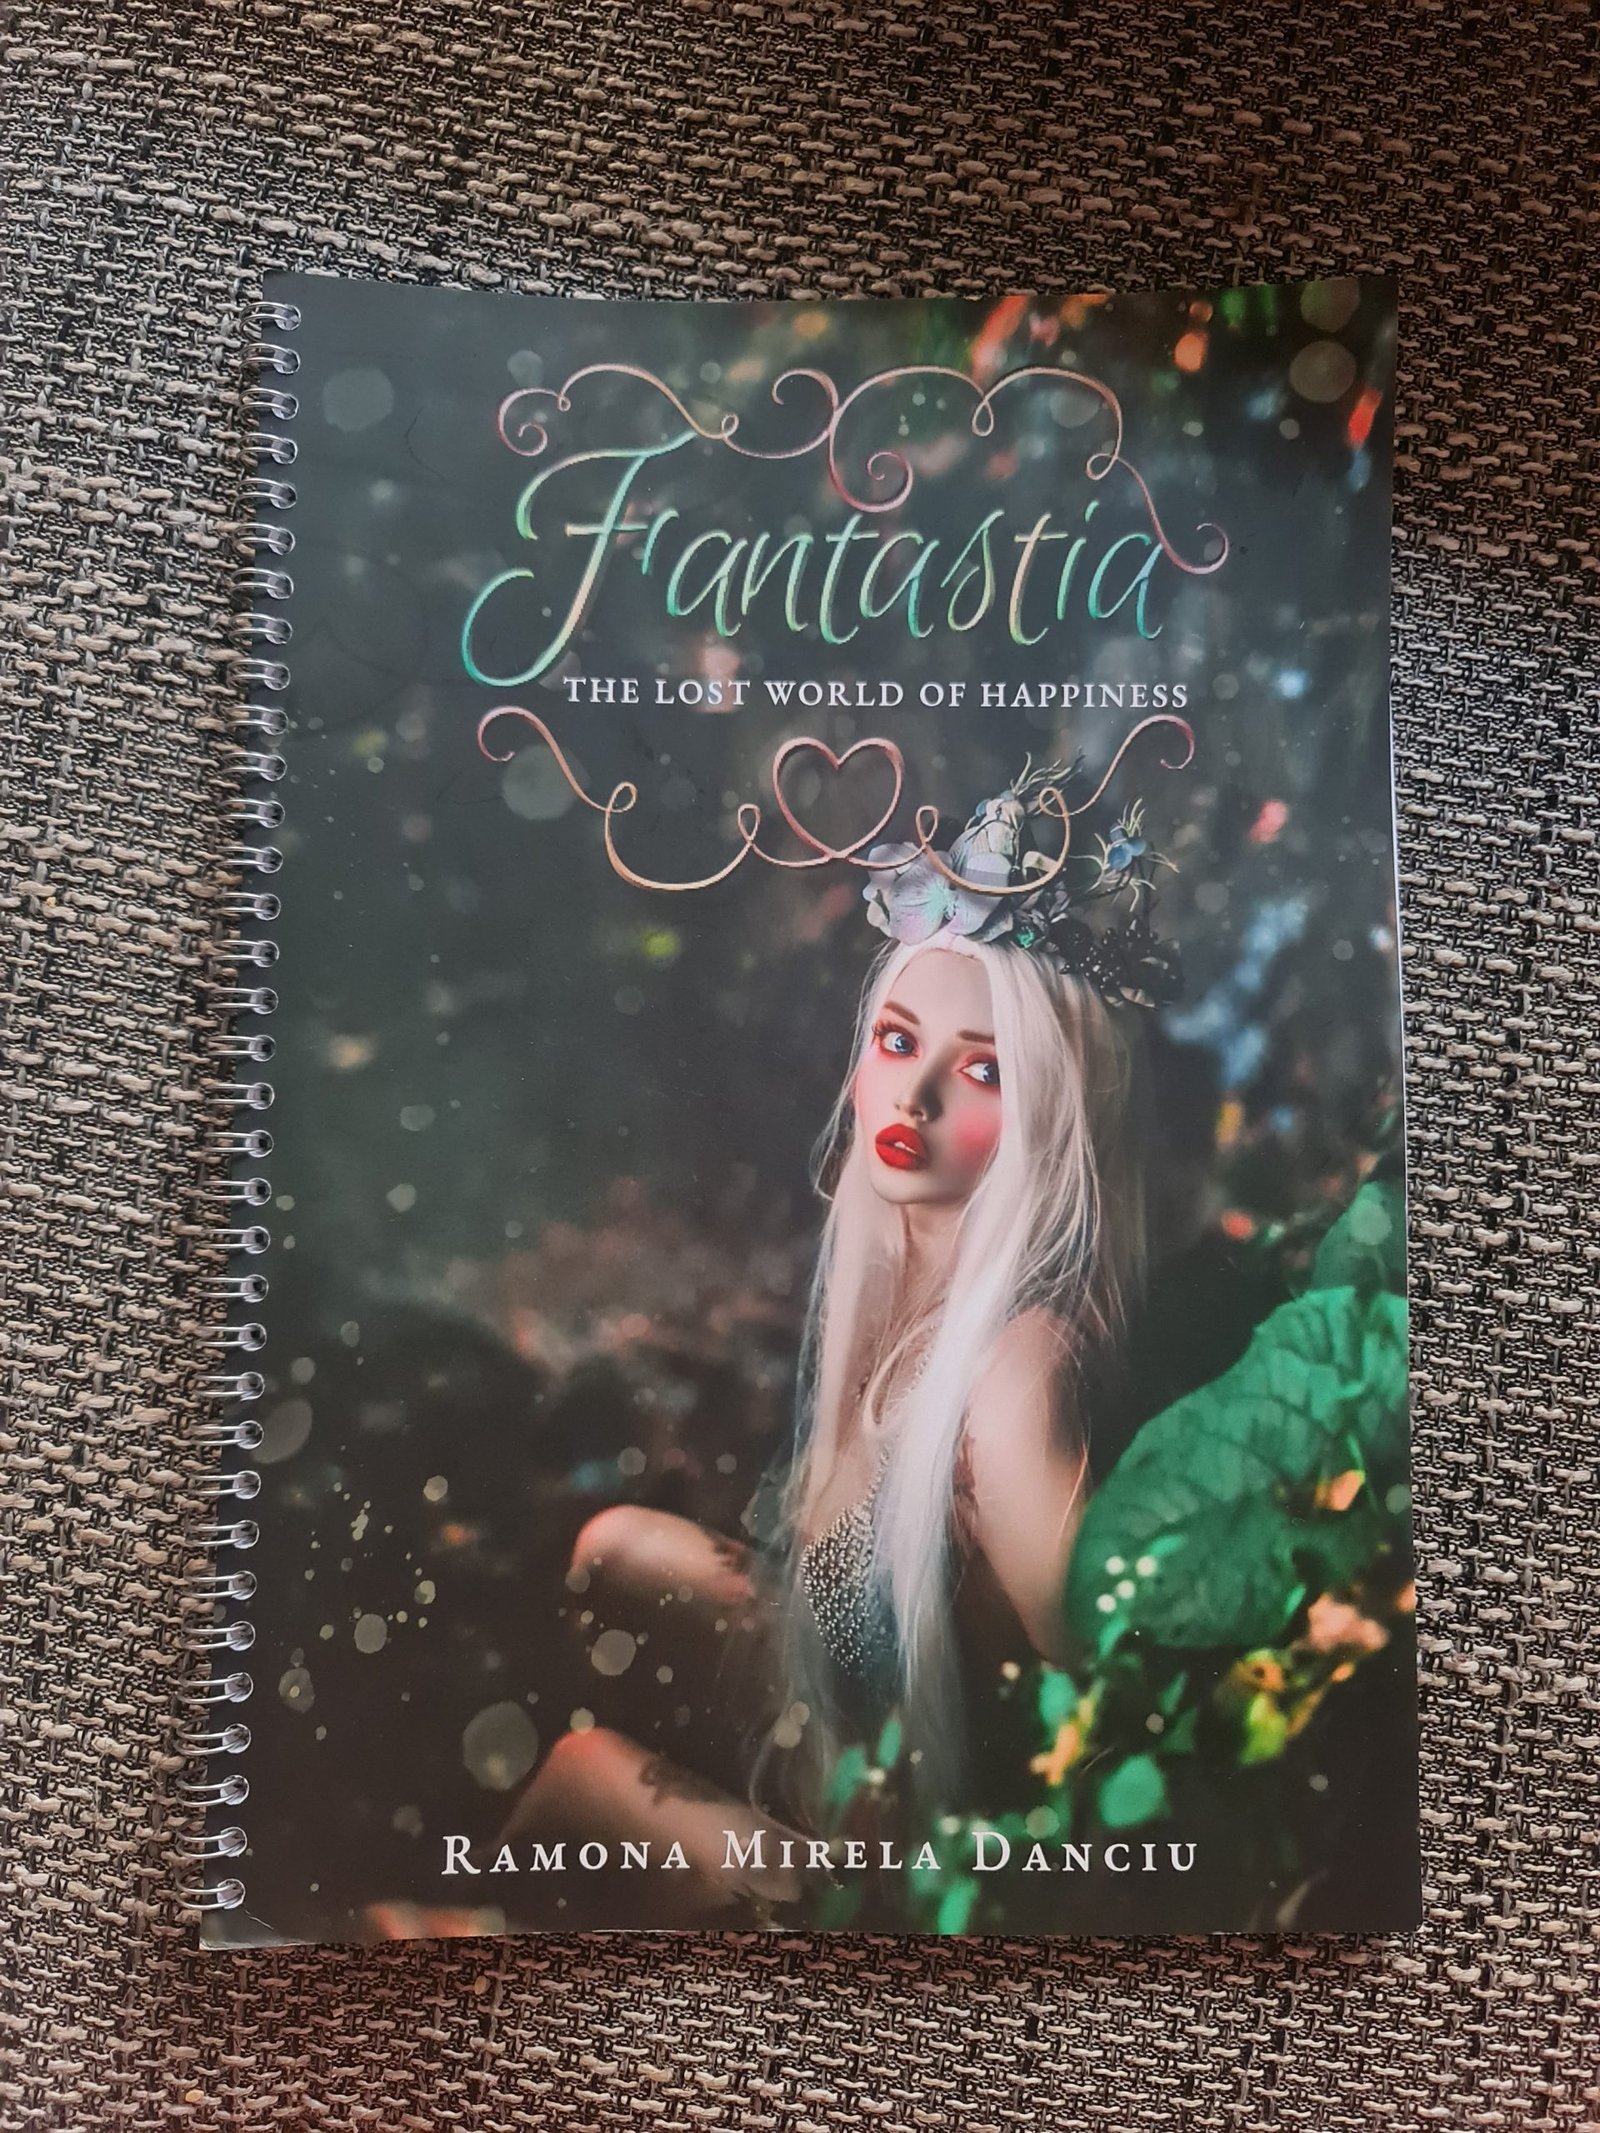 Interviewing Ramona Mirela Danciu and An Introduction of Her Book “3 / Fantastia: The Lost World of Happines”